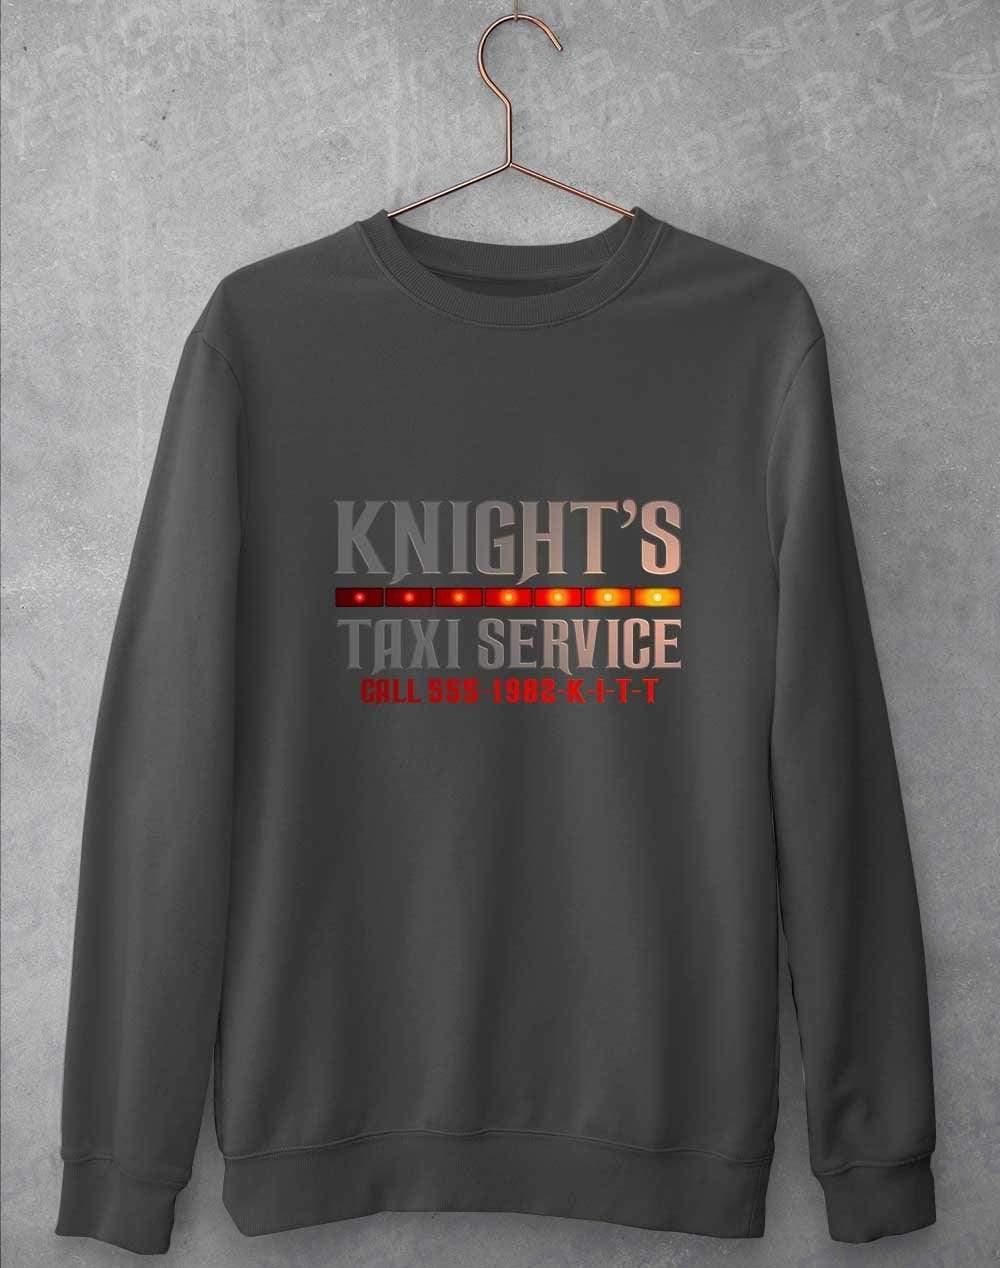 Knight's Taxi Sevice Sweatshirt S / Charcoal  - Off World Tees